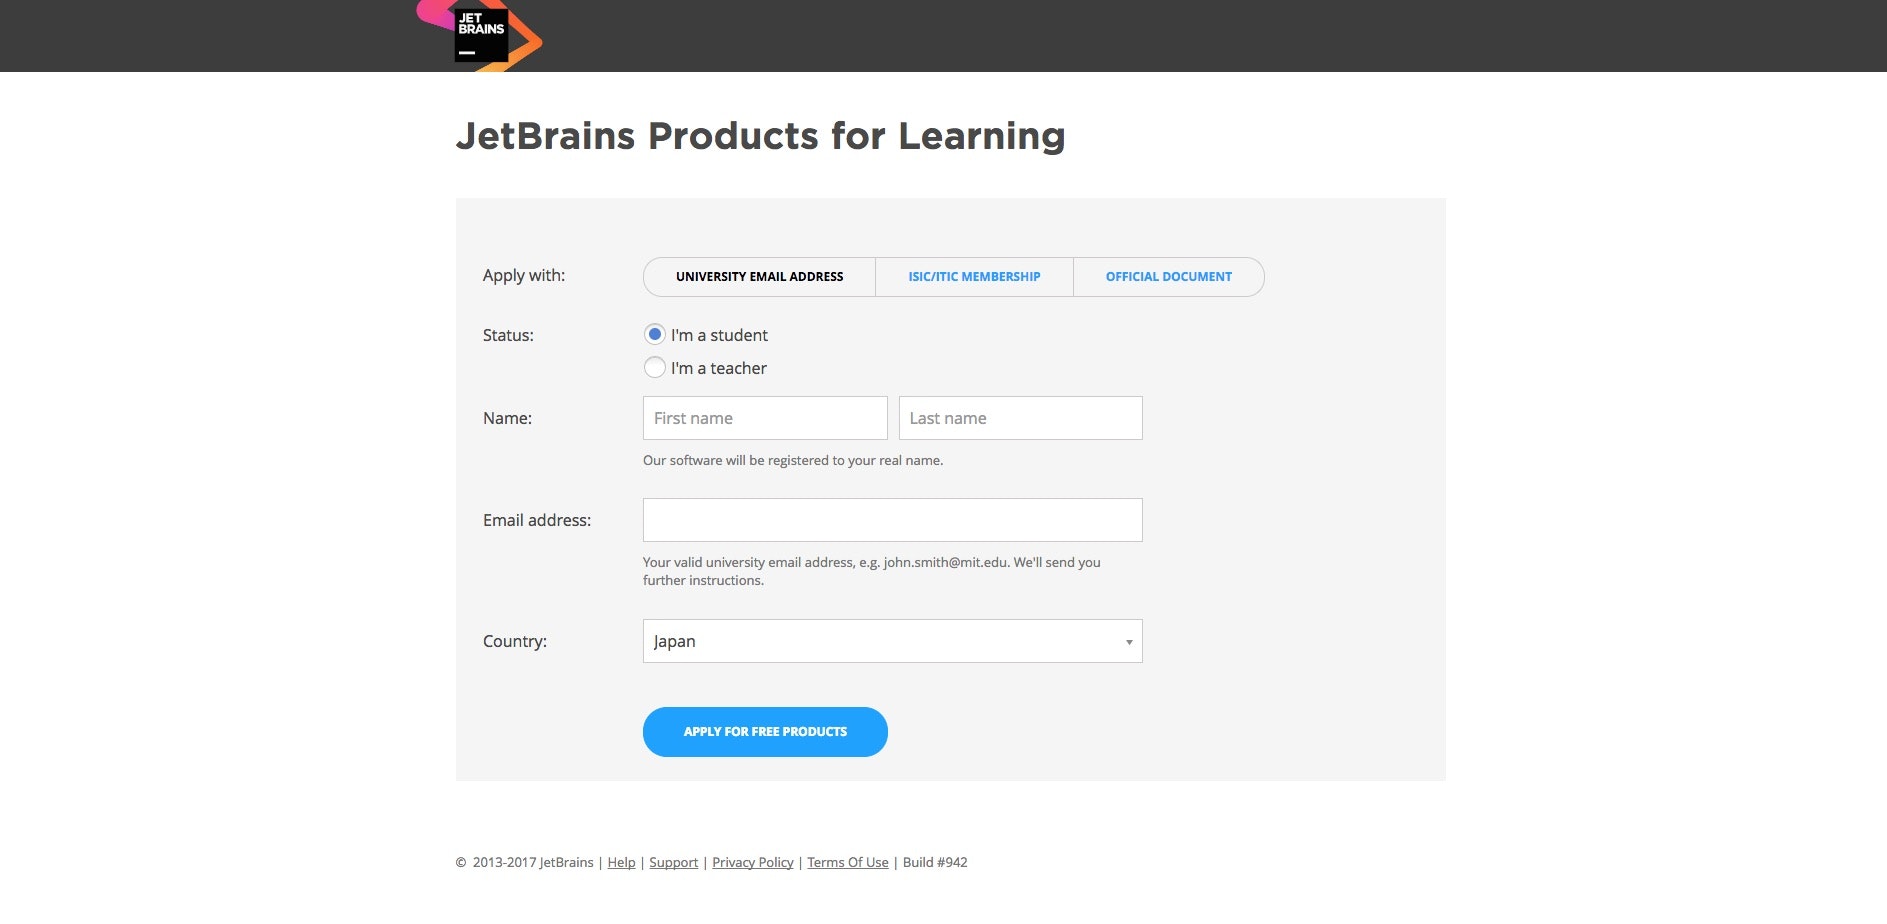 JetBrains_Products_for_Learning.jpg